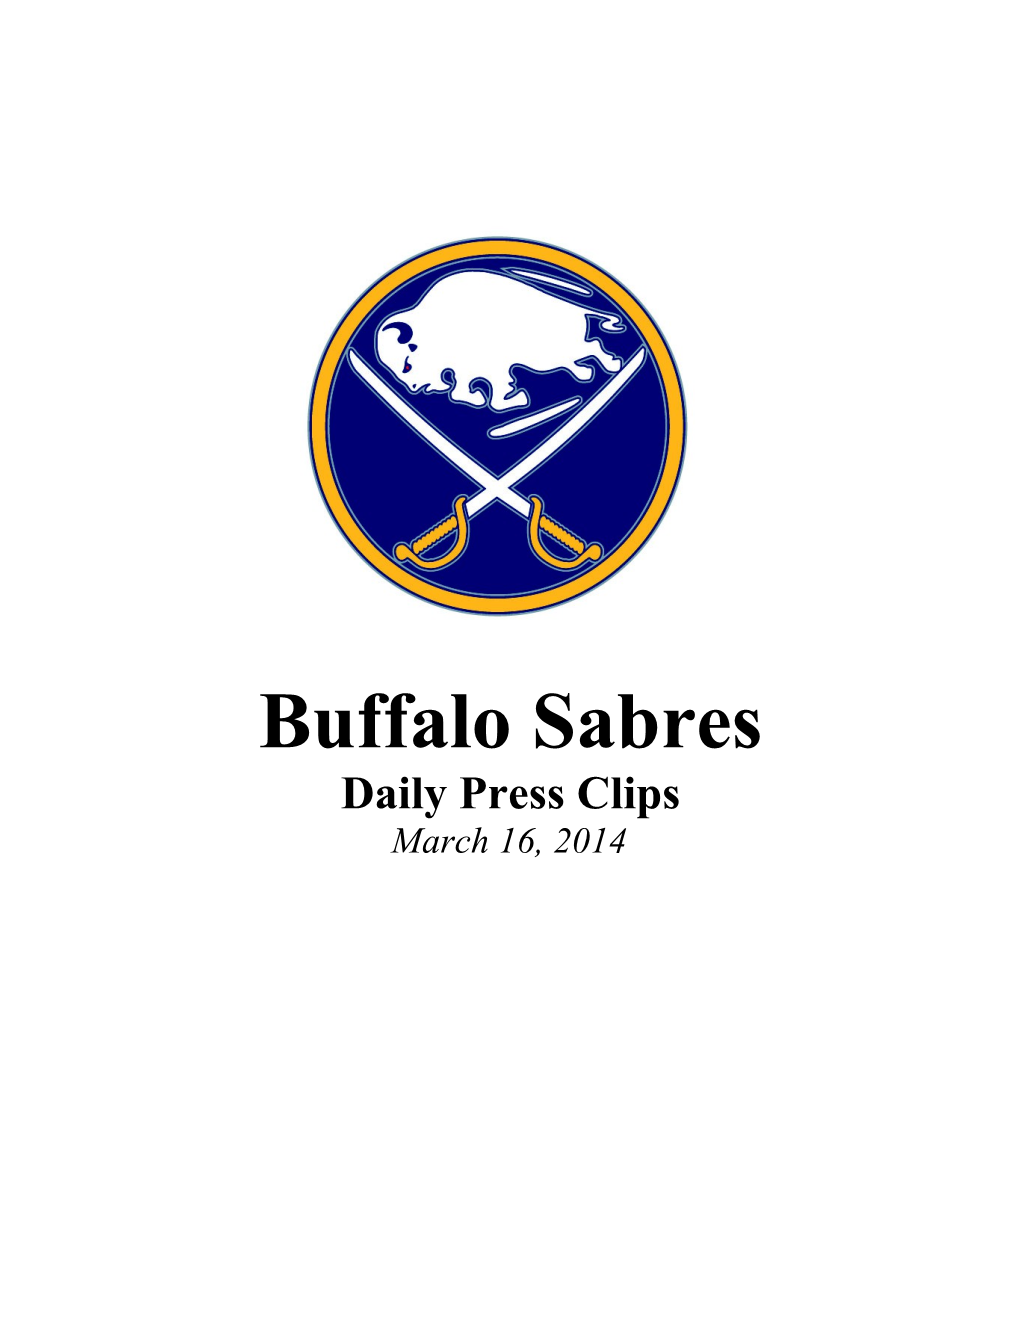 Daily Press Clips March 16, 2014 Canadiens-Sabres Preview by Alan Ferguson Associated Press March 16, 2014